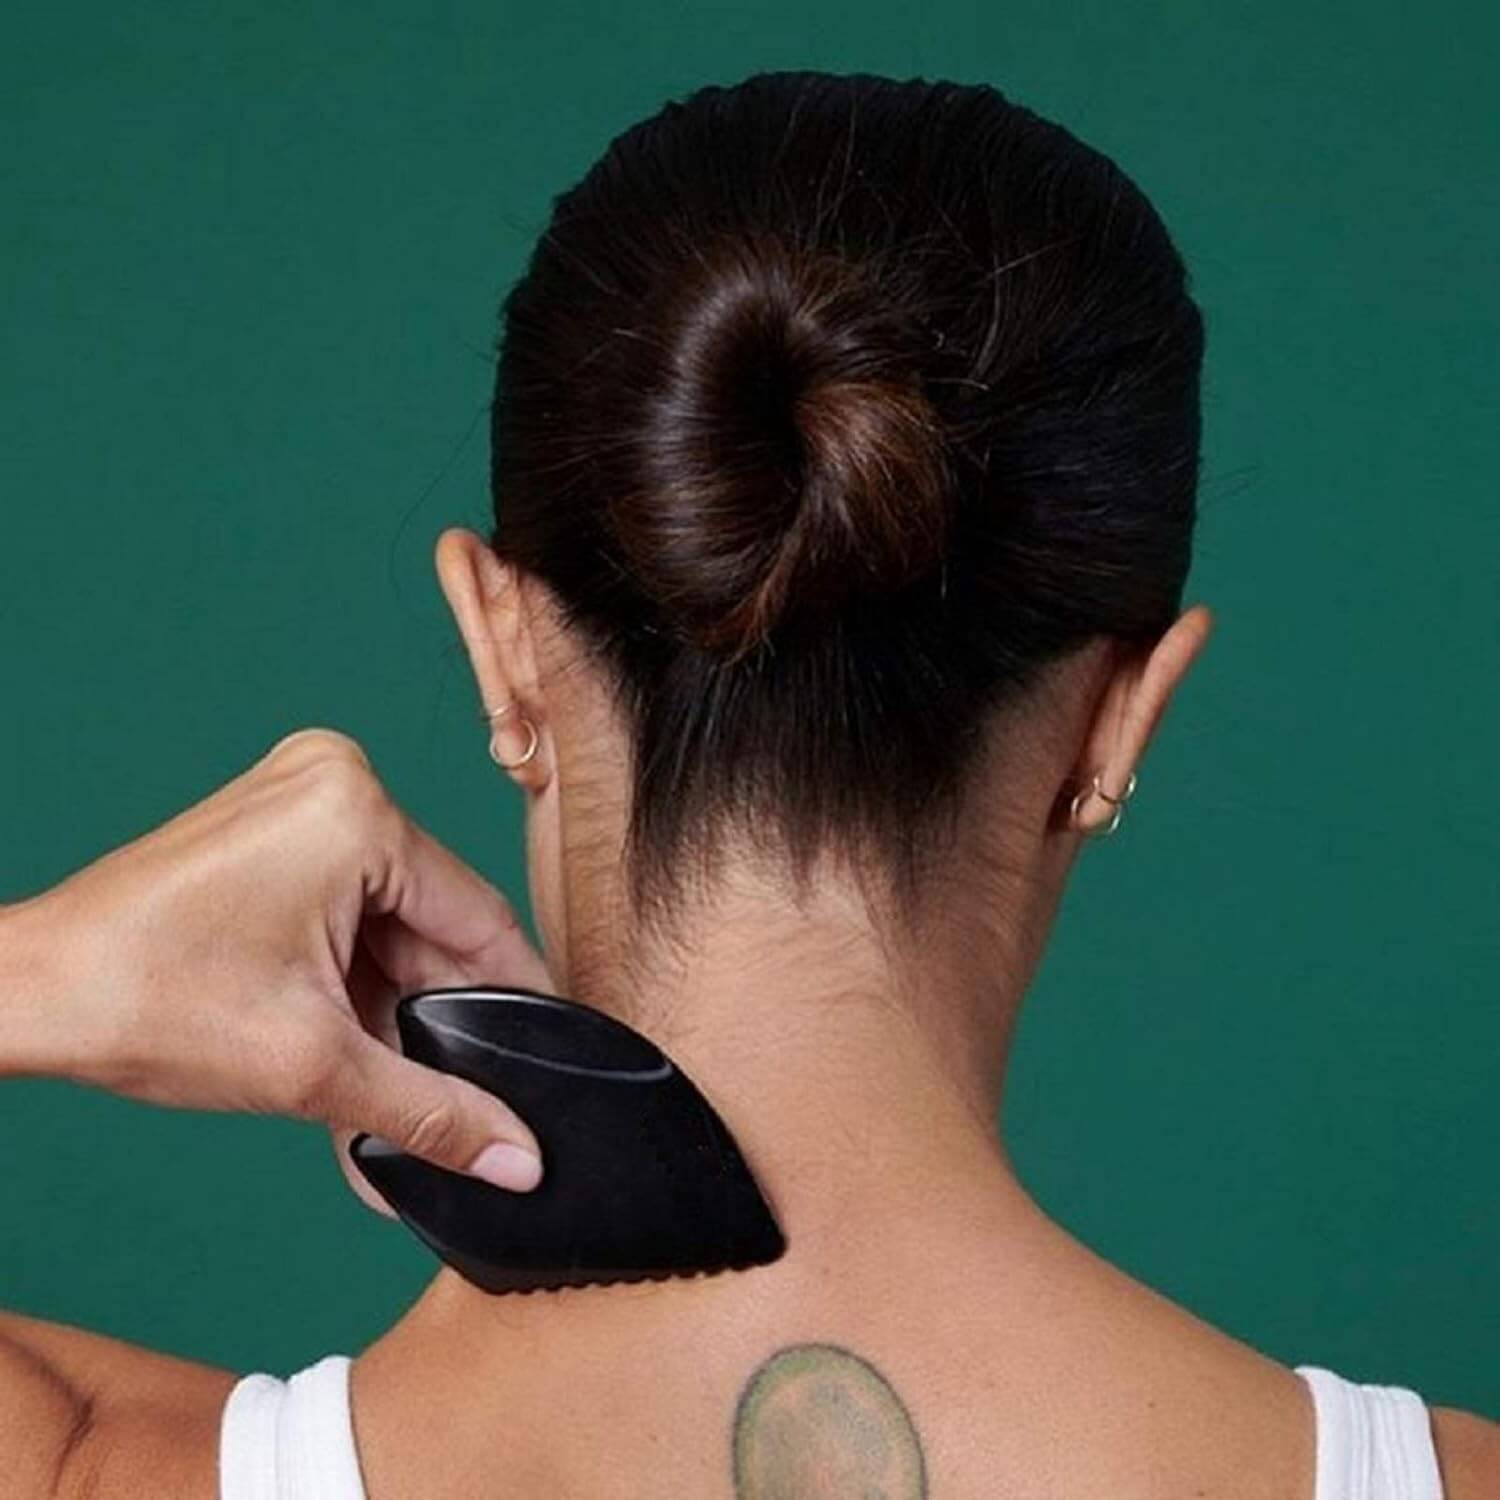 Model using the Bian Stone Gua Sha on the back of her neck